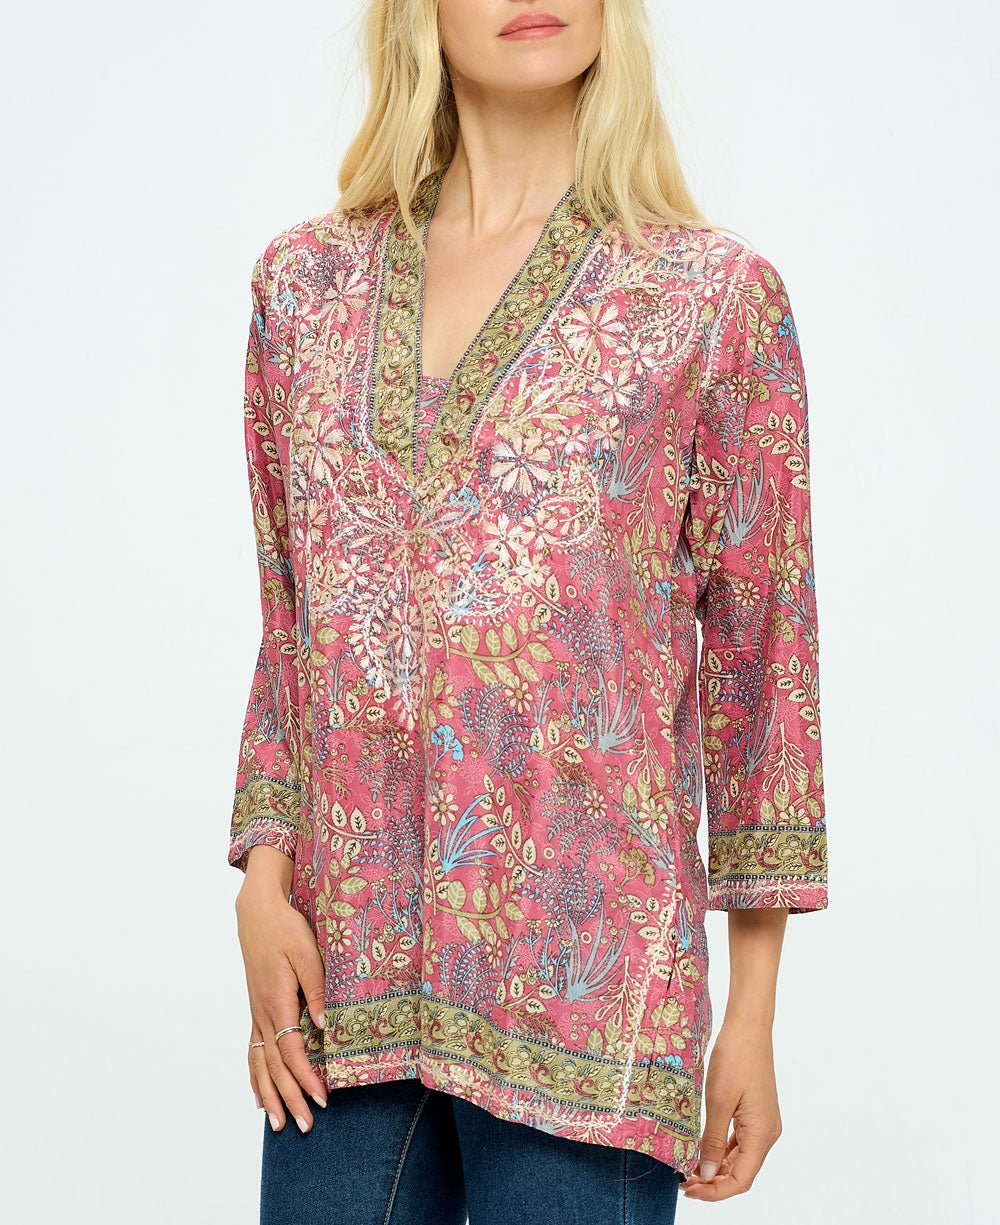 Embroidered Blush Tones V Neck Tunic Top - Shirts & Tops S